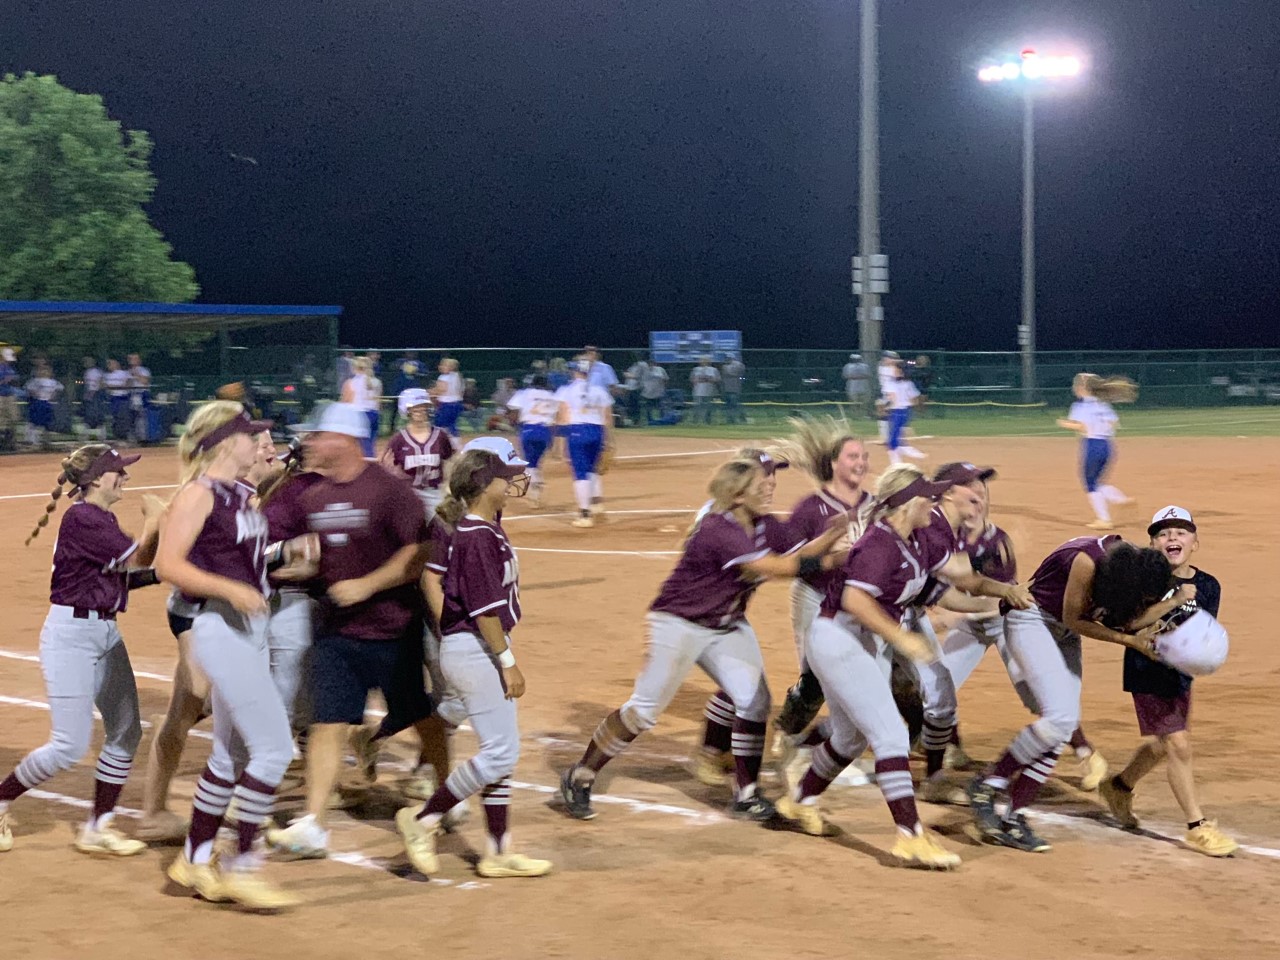 Featured image for “Hodge’s Walk-off gives Alcoa 4-3 win over Riverside”